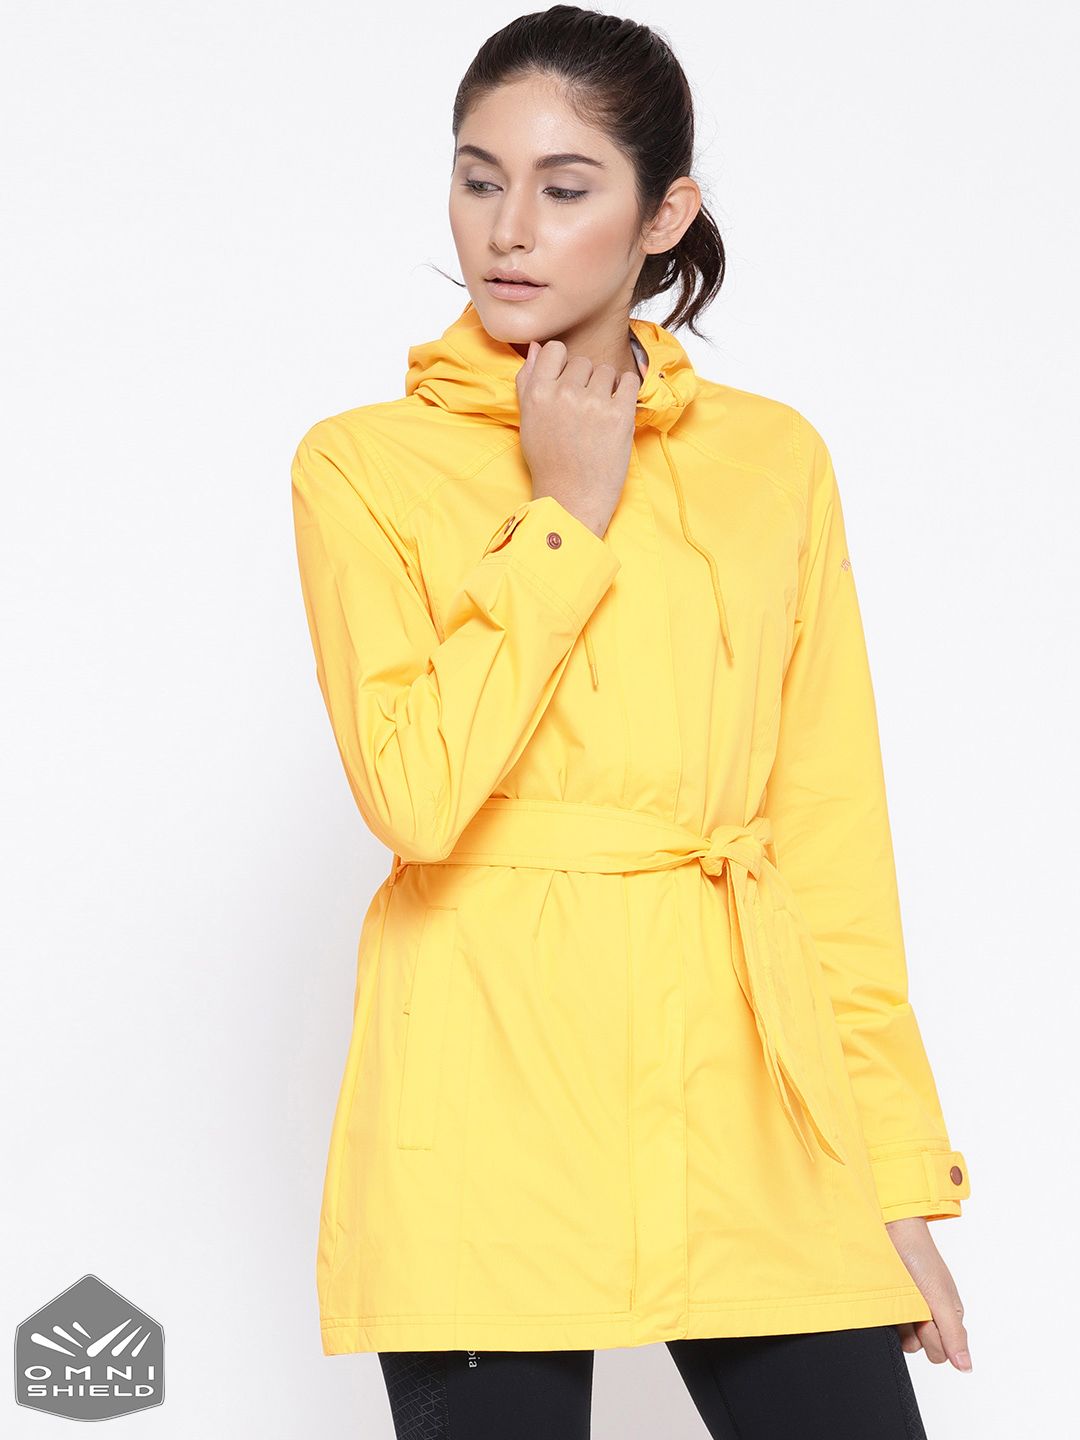 Columbia Yellow Pardon My Trench Rain Jacket Columbia Yellow Pardon My Trench Rain Jacket Treated To Resist Rain And Stains This Sleek Trench Offers Style Protection And Comfort On Chilly Days Omni Shield Advanced Repellencyzippered Hand